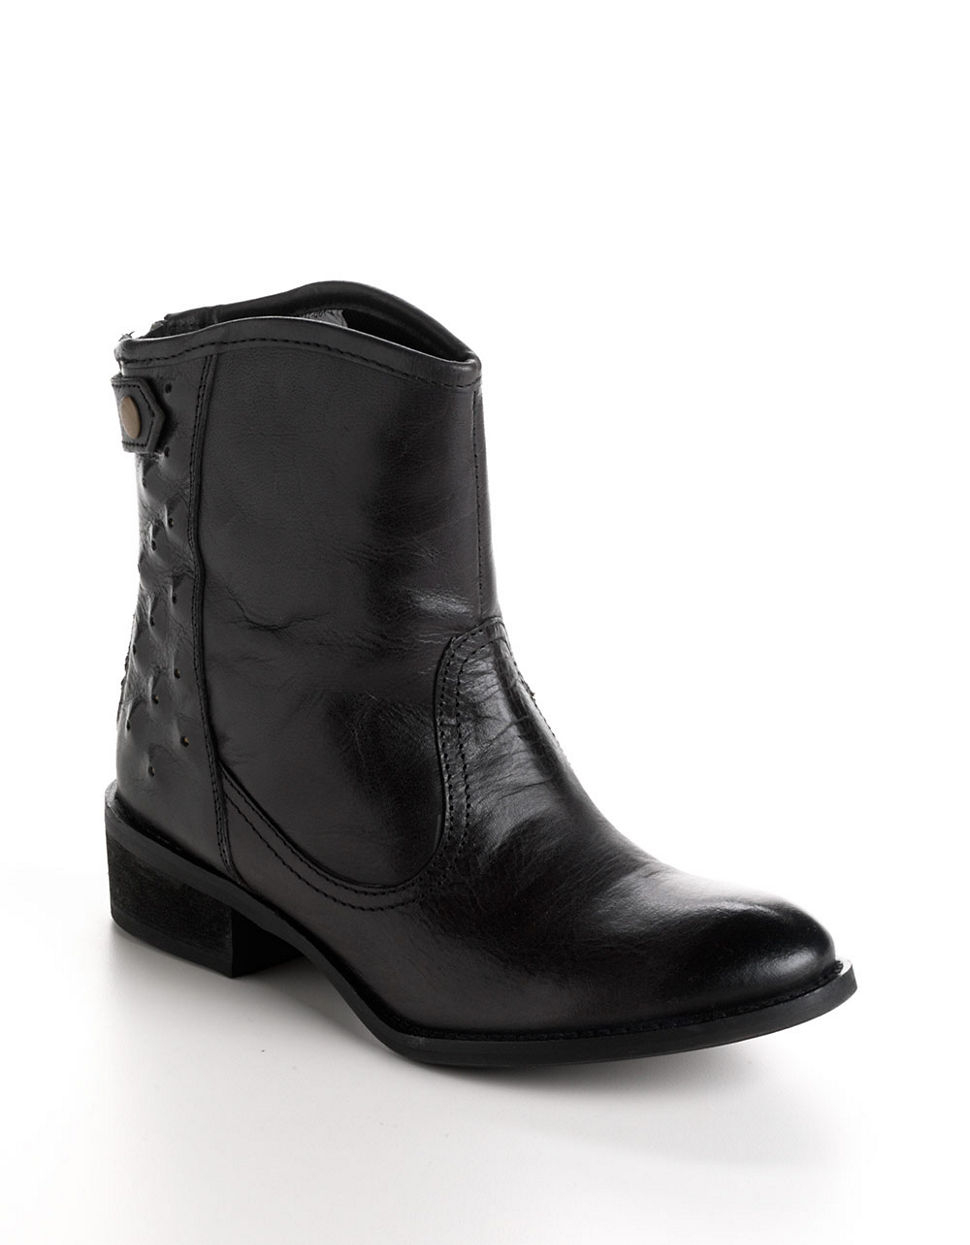 Naughty Monkey Incognito Leather Moto Boots in Black | Lyst